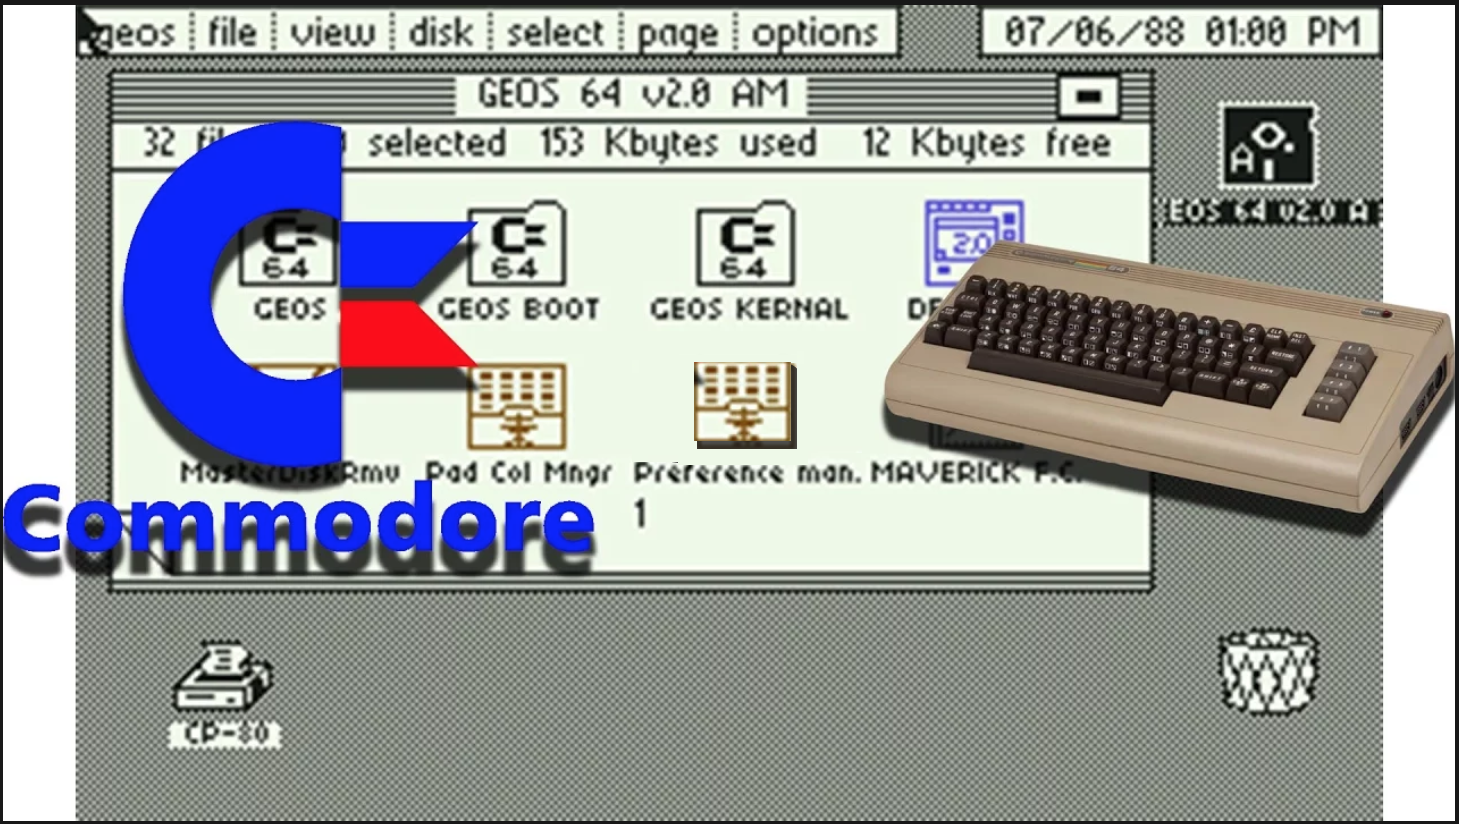 2GB Commodore 64 GEOS for Windows-PC, games apps